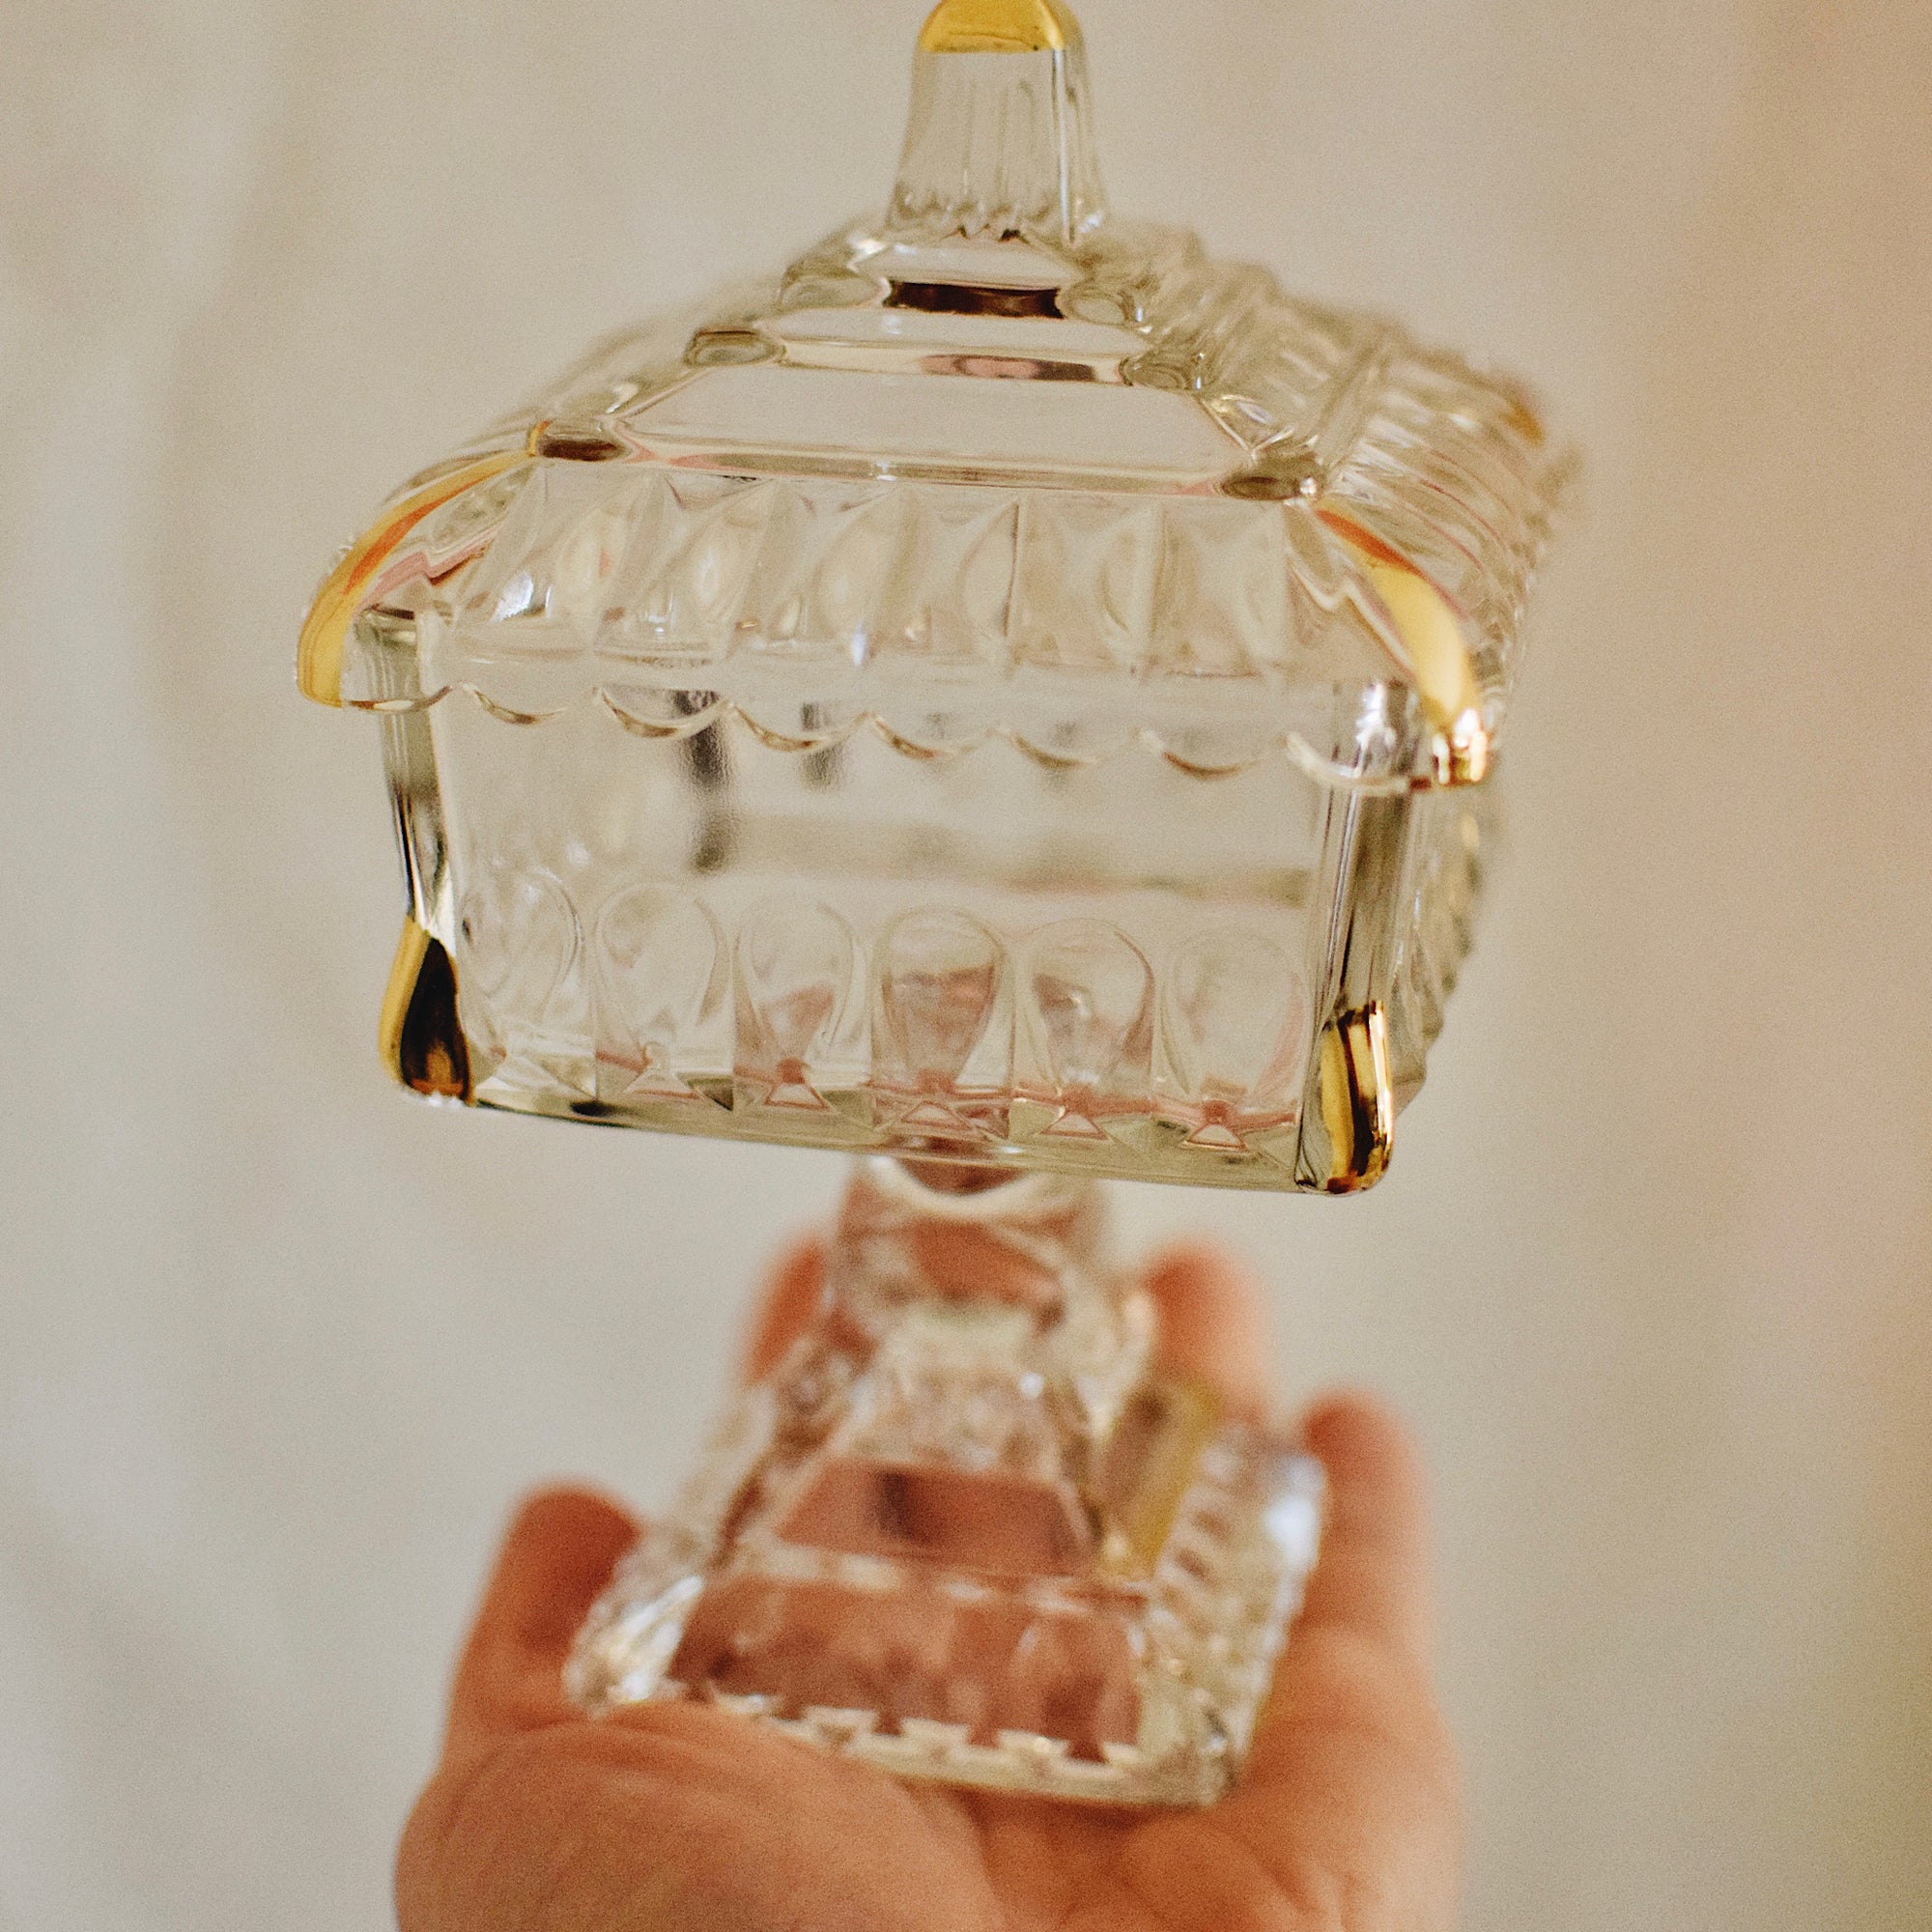 Thrifted Goods - Vintage Jeanette Glass Pedestal Glass Candy Dish (Clear w/Gold Accents)